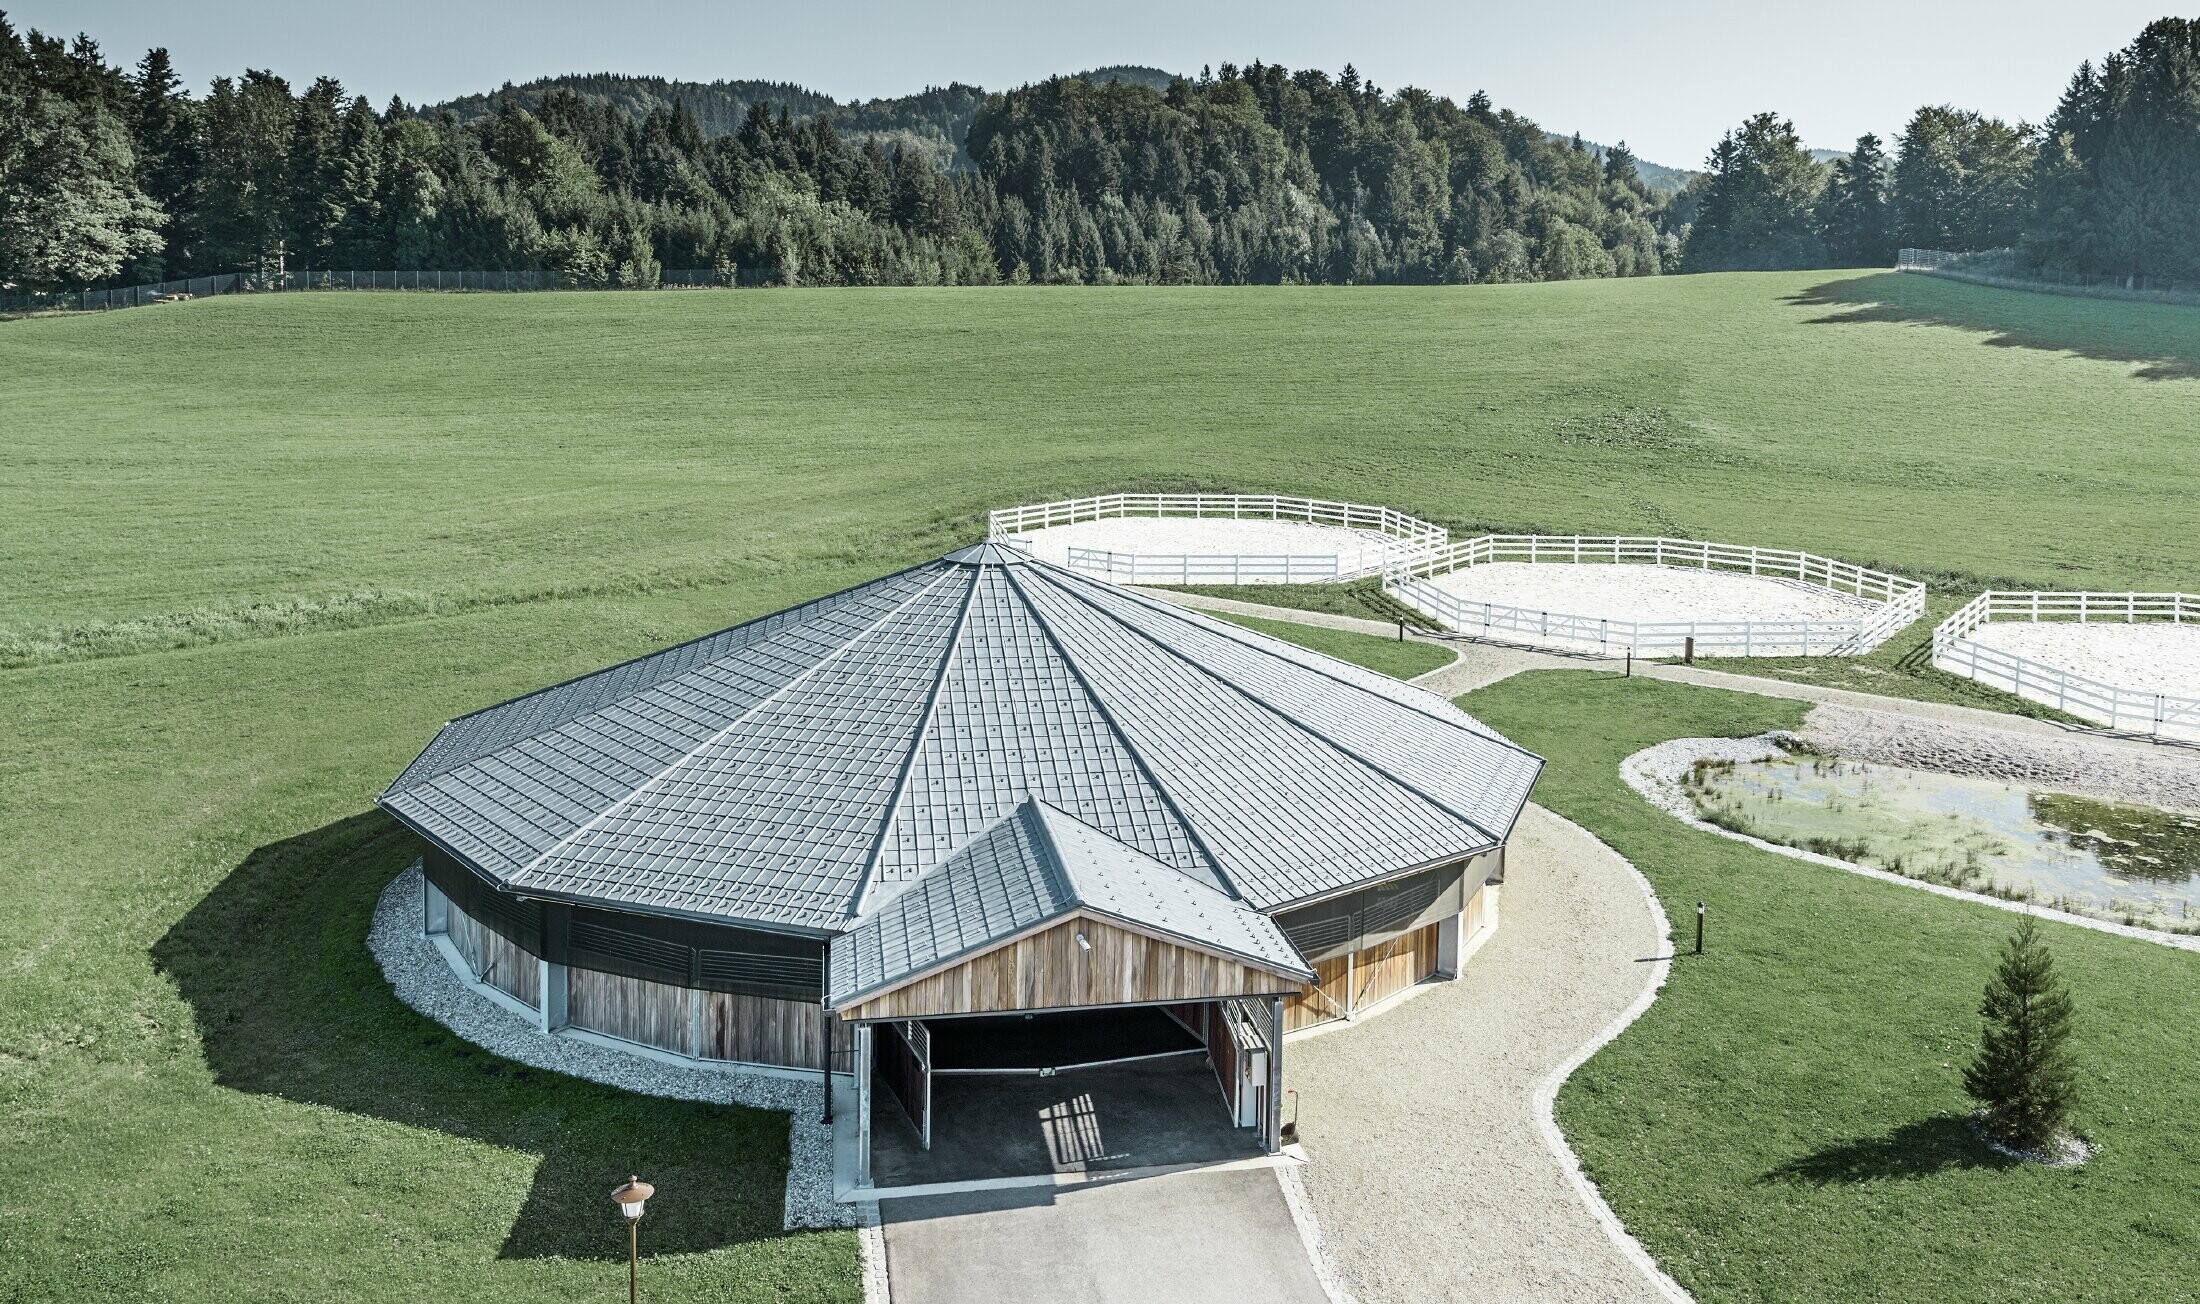 Round riding arena clad in the PREFA roof tile in stone grey